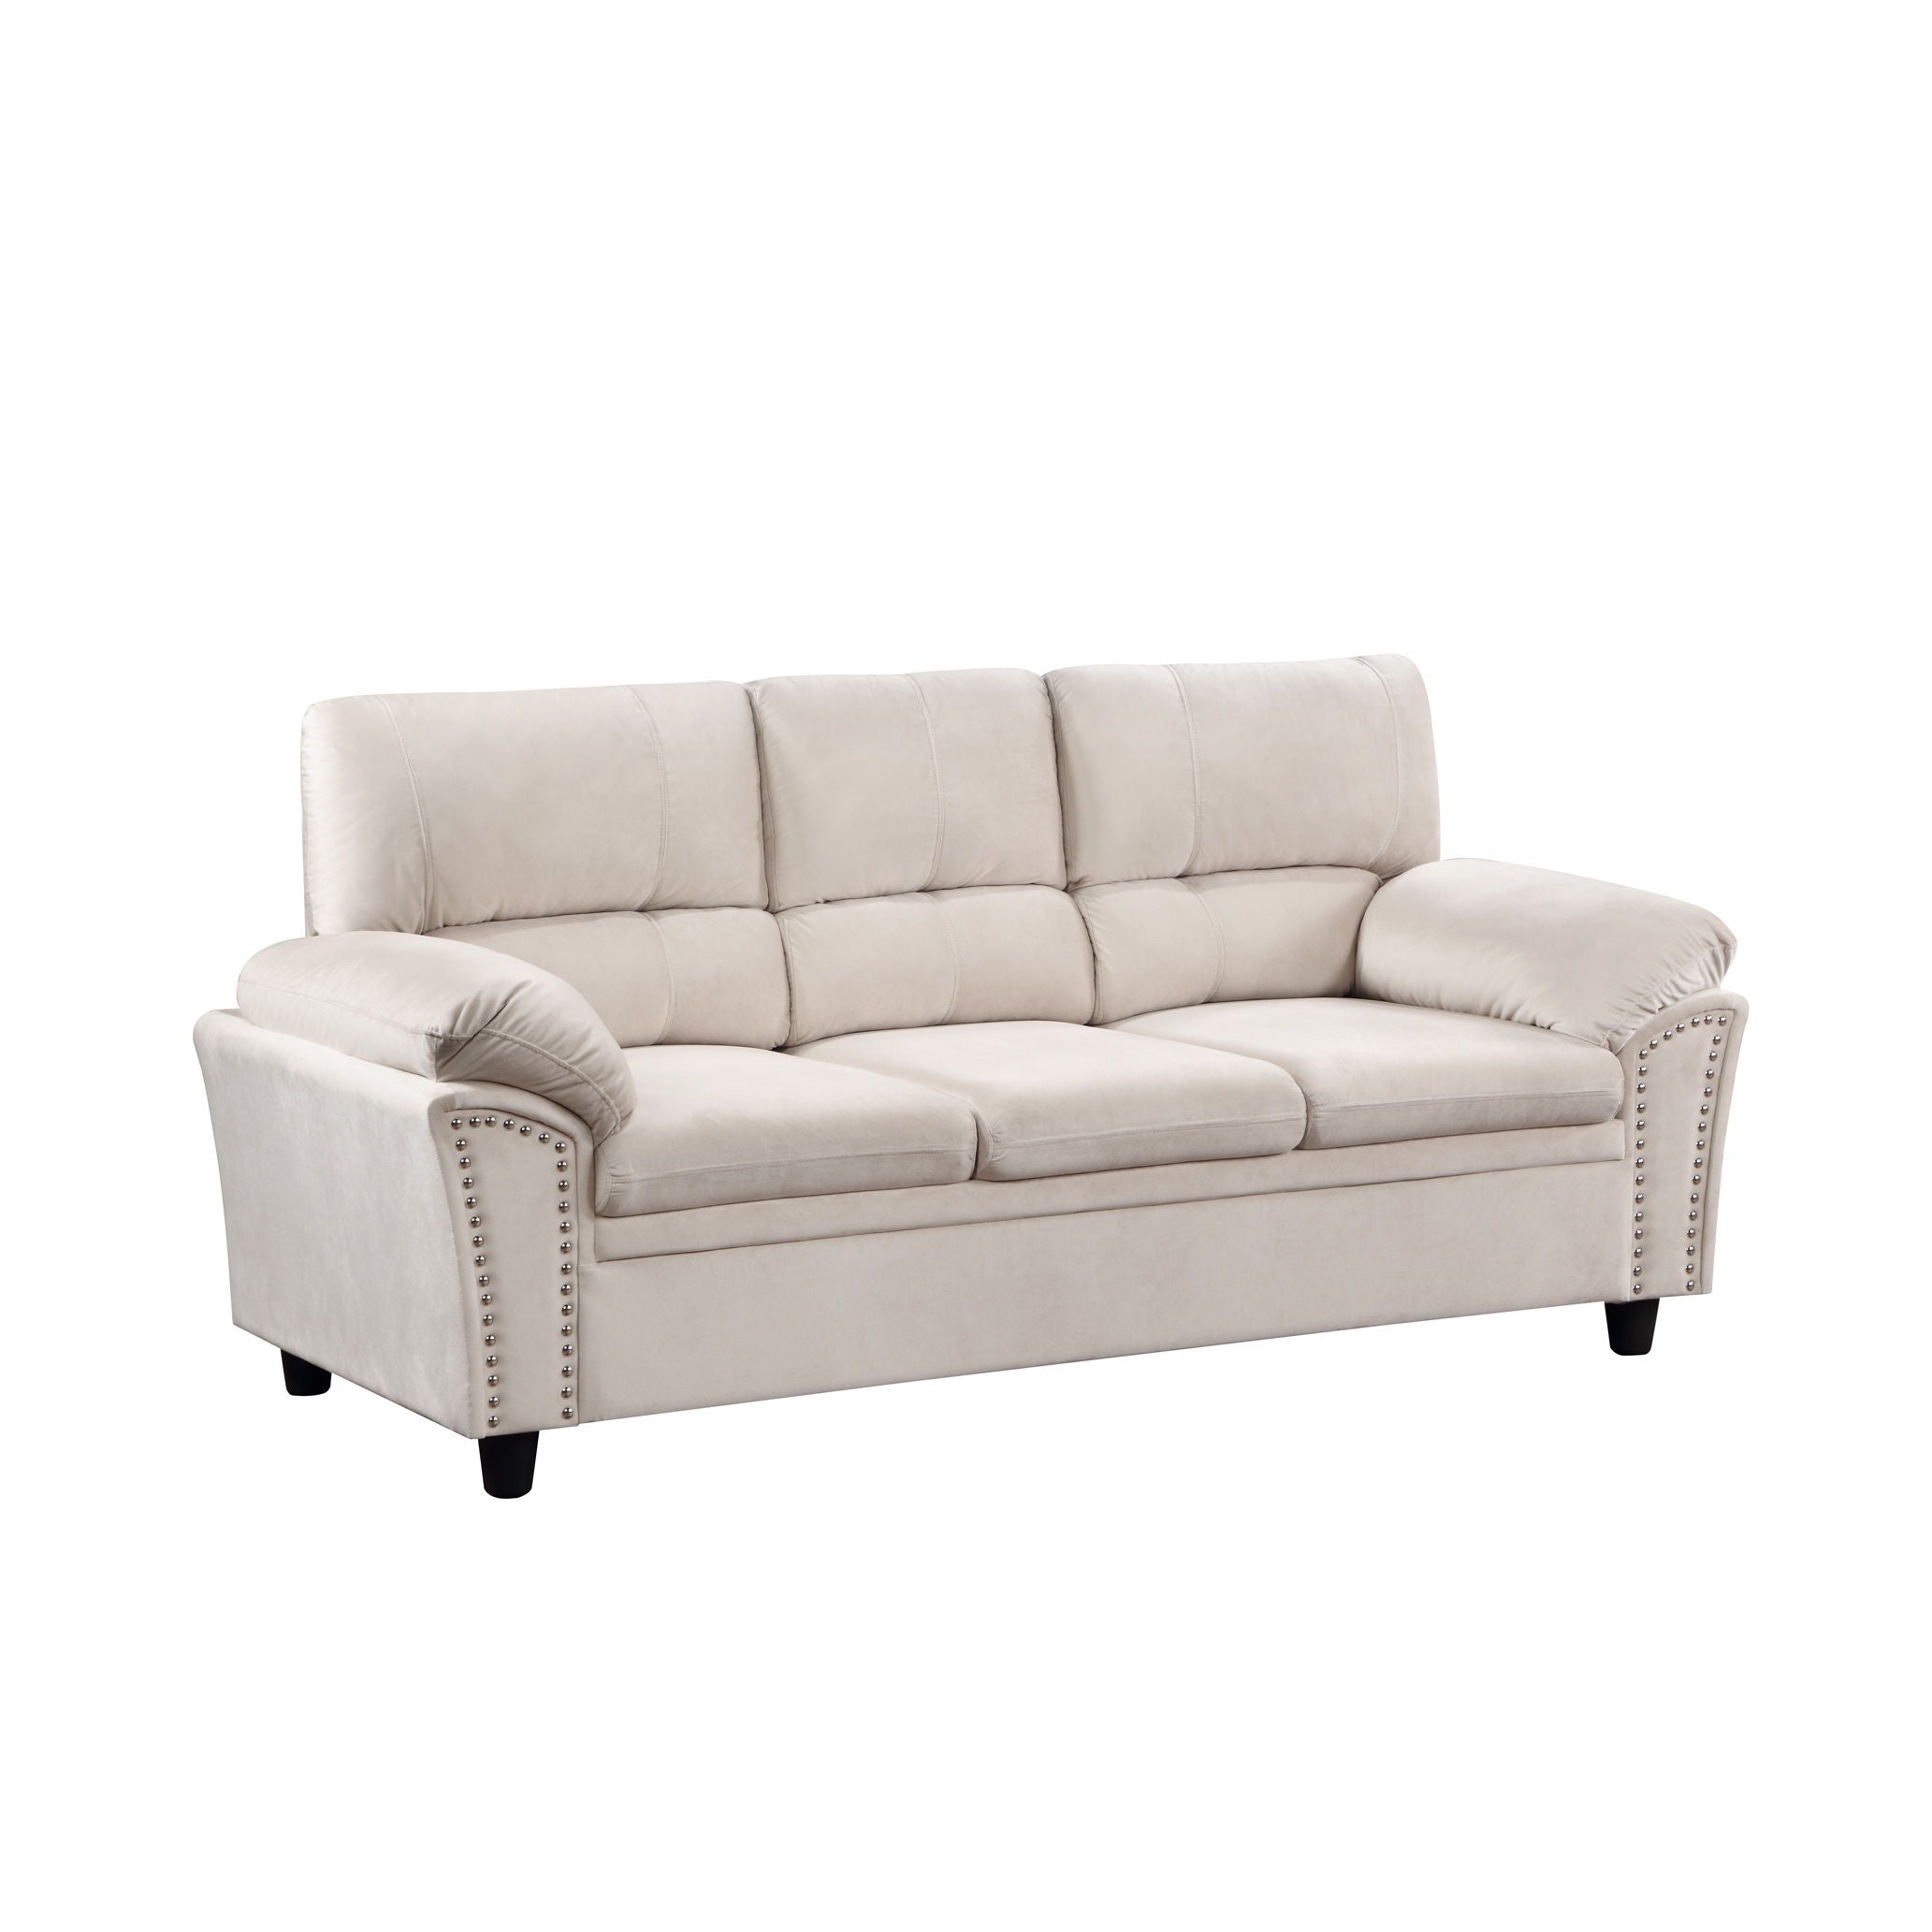 3 Seater Cloud Couch Sofa For Living Room, Bedroom, Office Beige